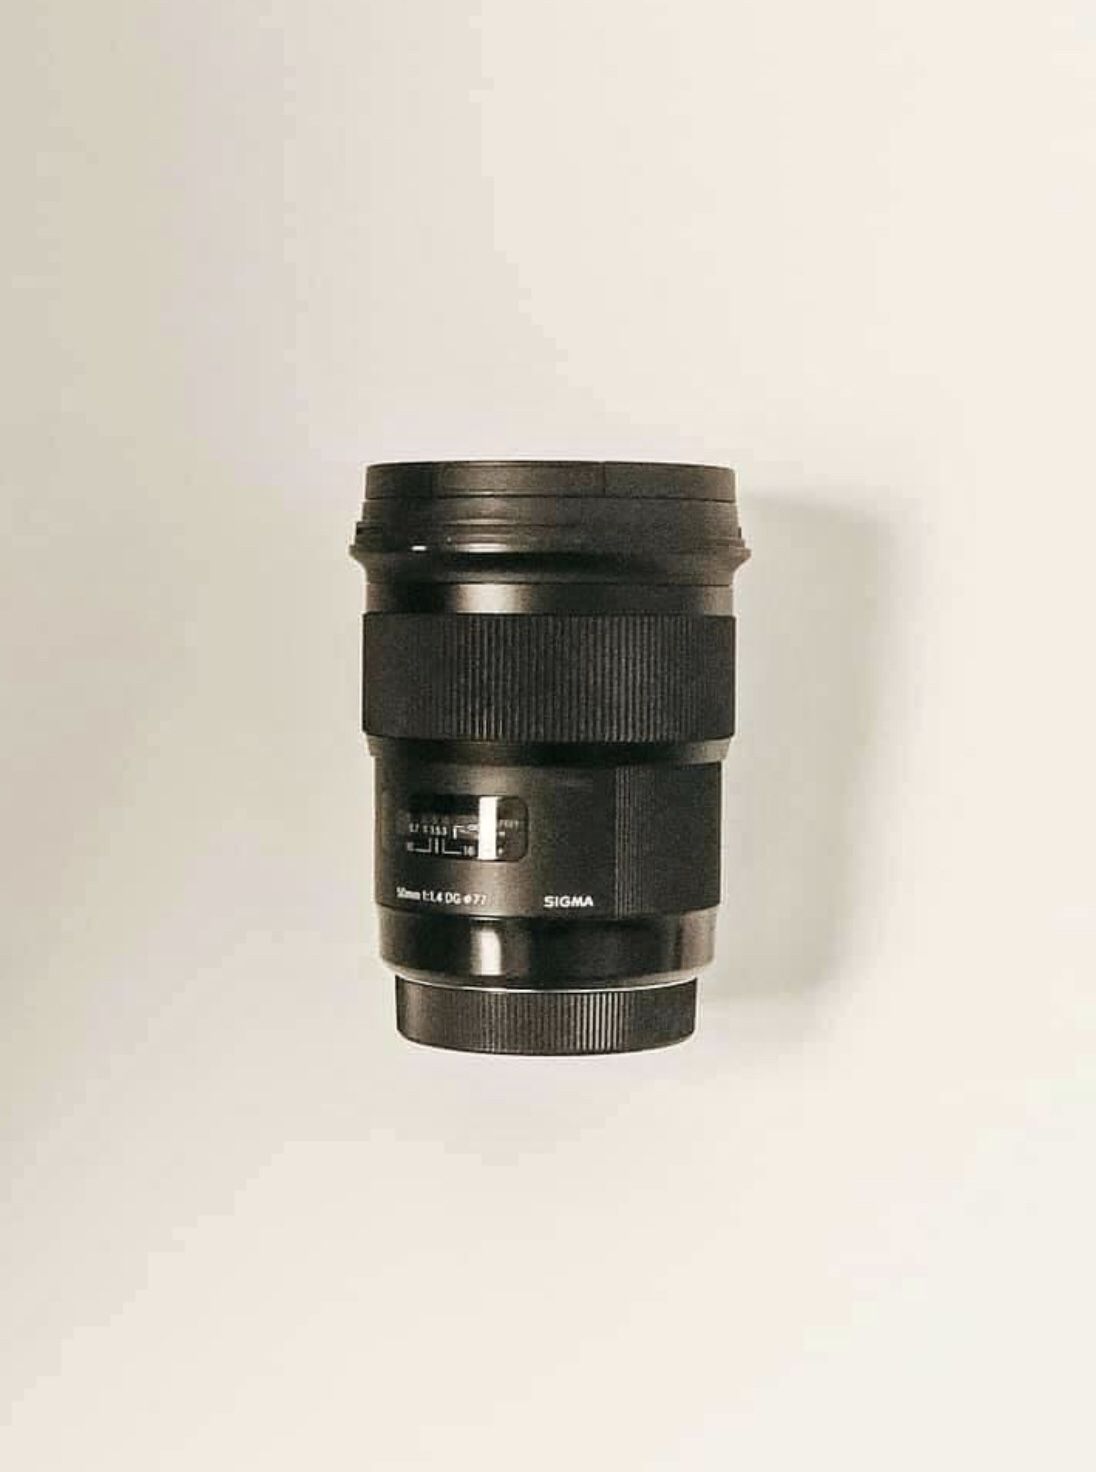 Sigma Art 50mm 1.4 Lens for Canon